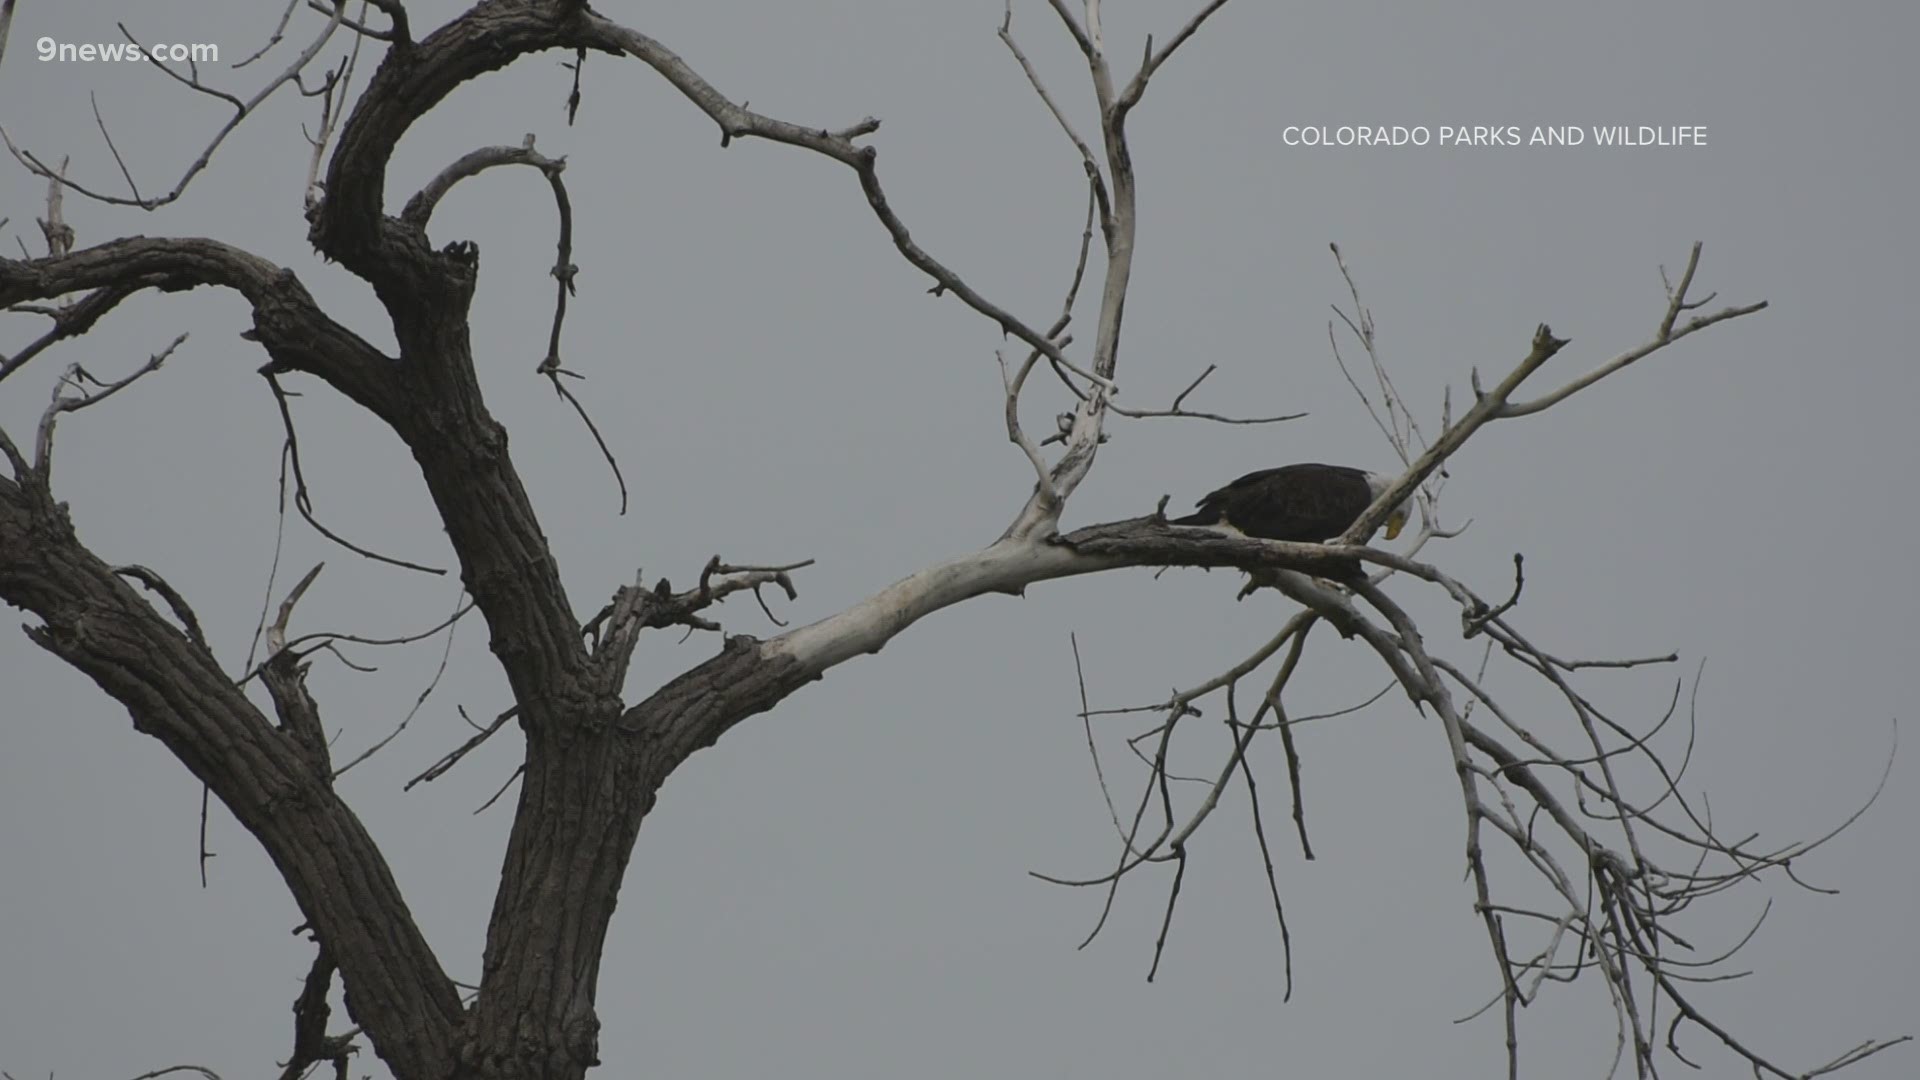 CPW to study bald eagles that live on Front Range 9news